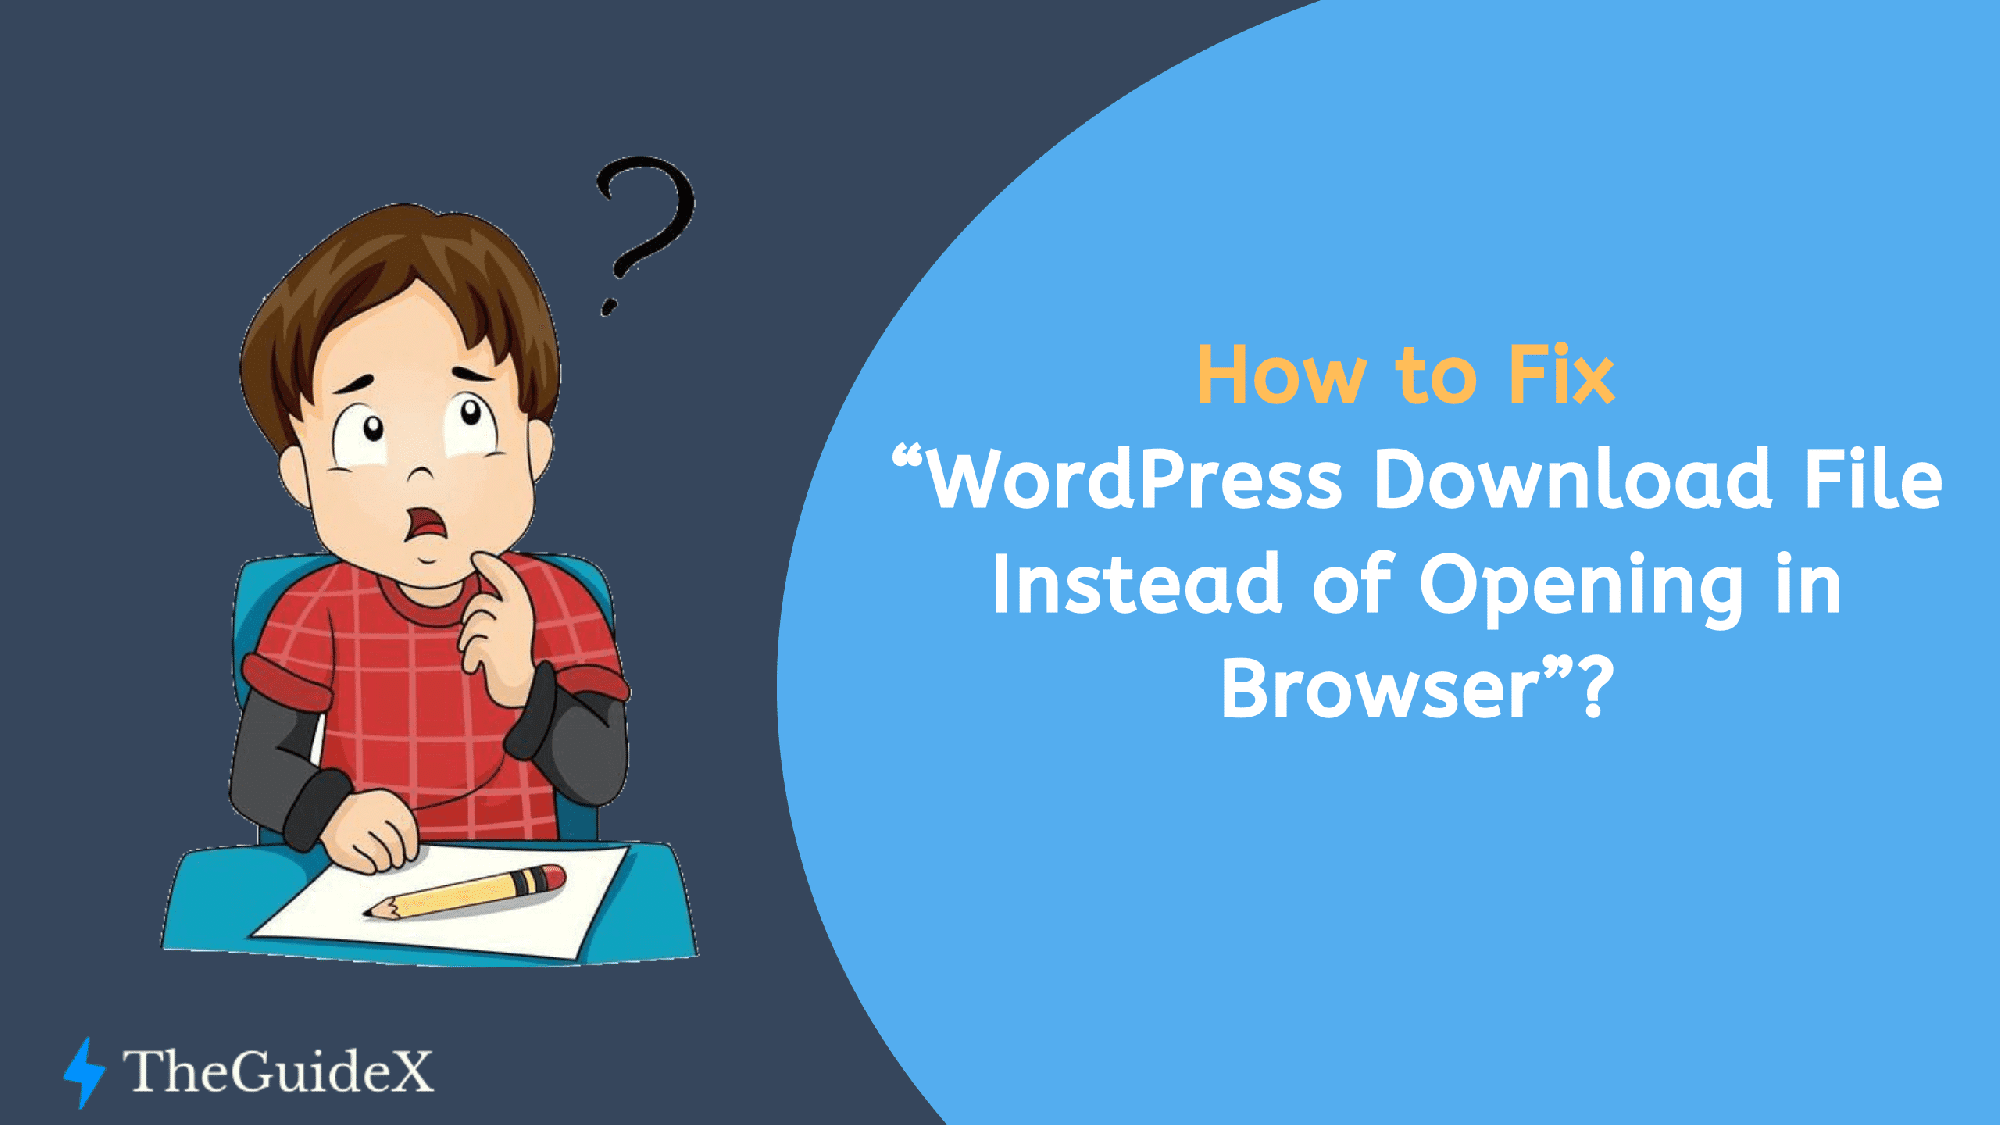 wordpress download file, wordpress download file instead of opening, wp file download